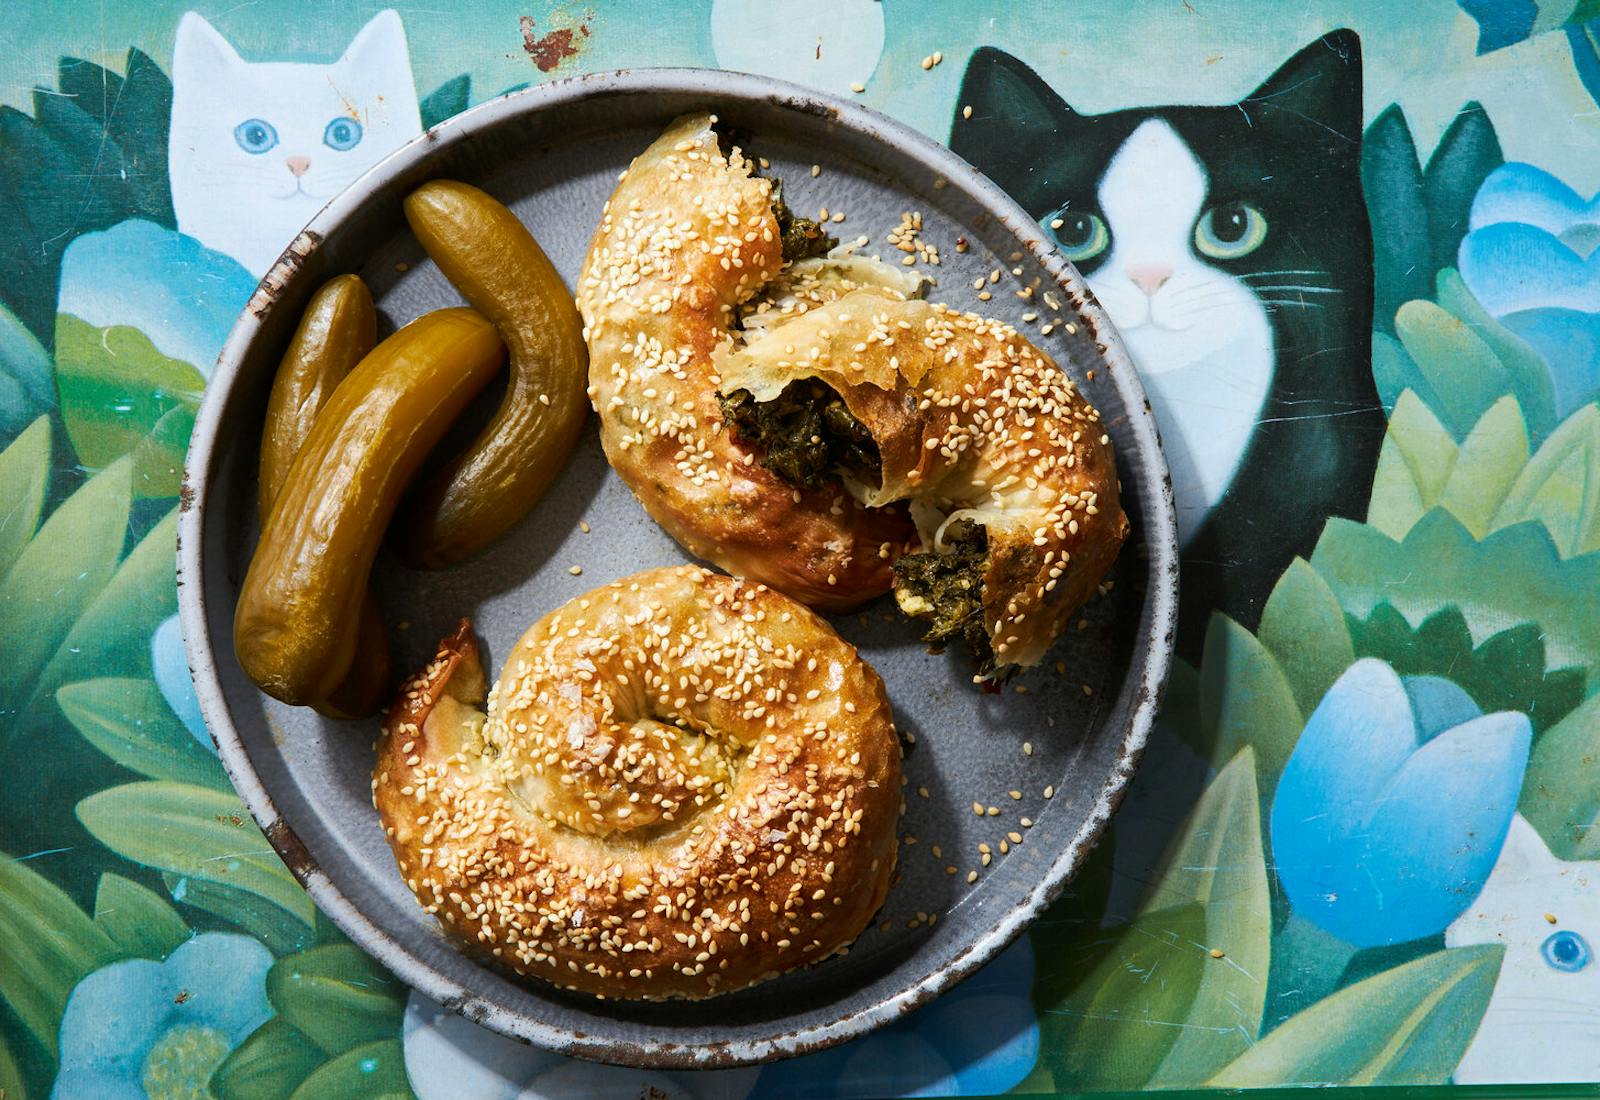 Bourekas with Israeli pickles on grey plate atop tablecloth with graphic cats and flowers.